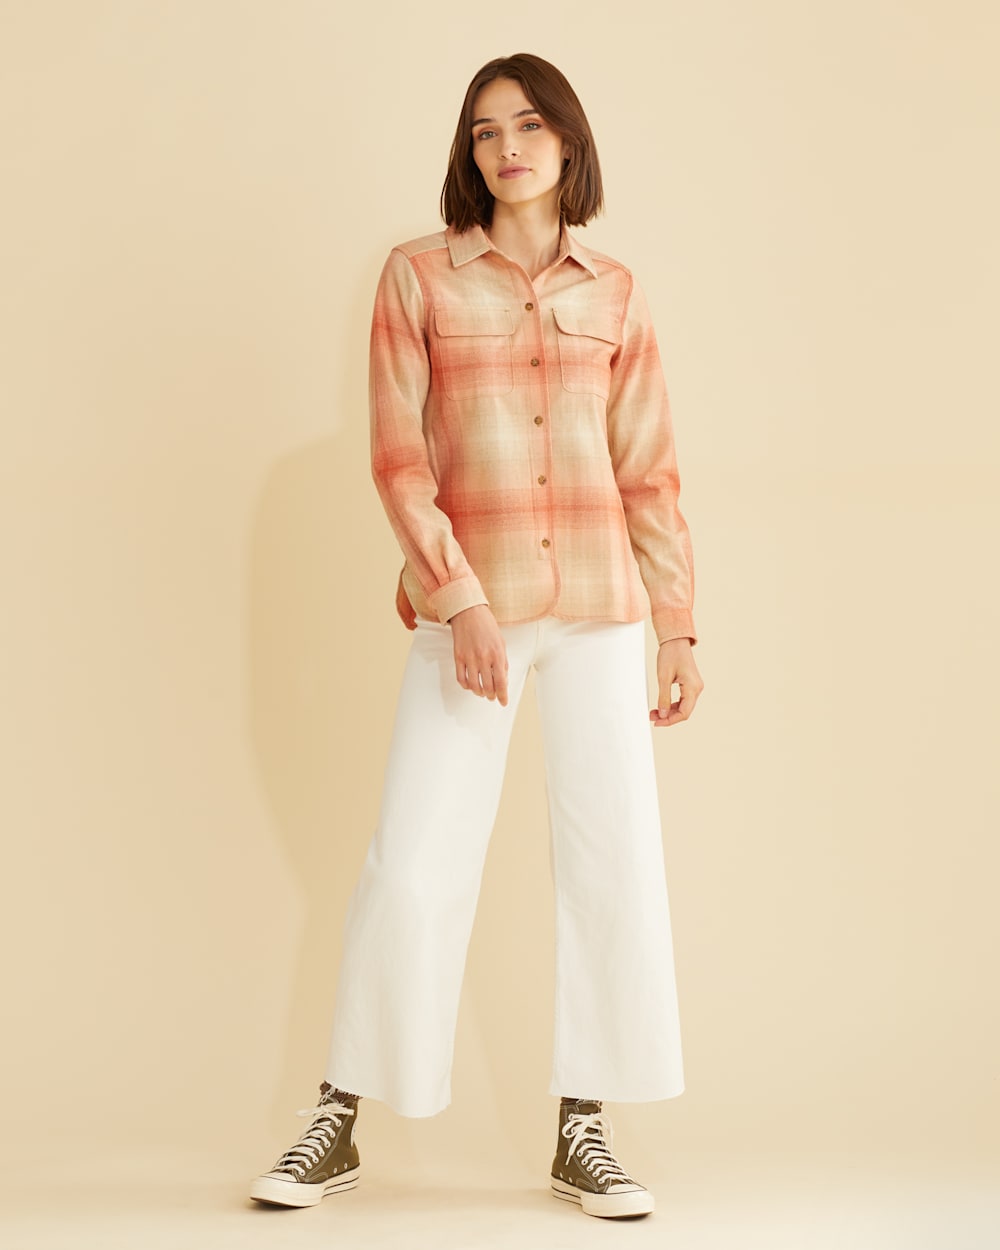 ALTERNATE VIEW OF WOMEN'S BOARD SHIRT IN APRICOT OMBRE image number 2